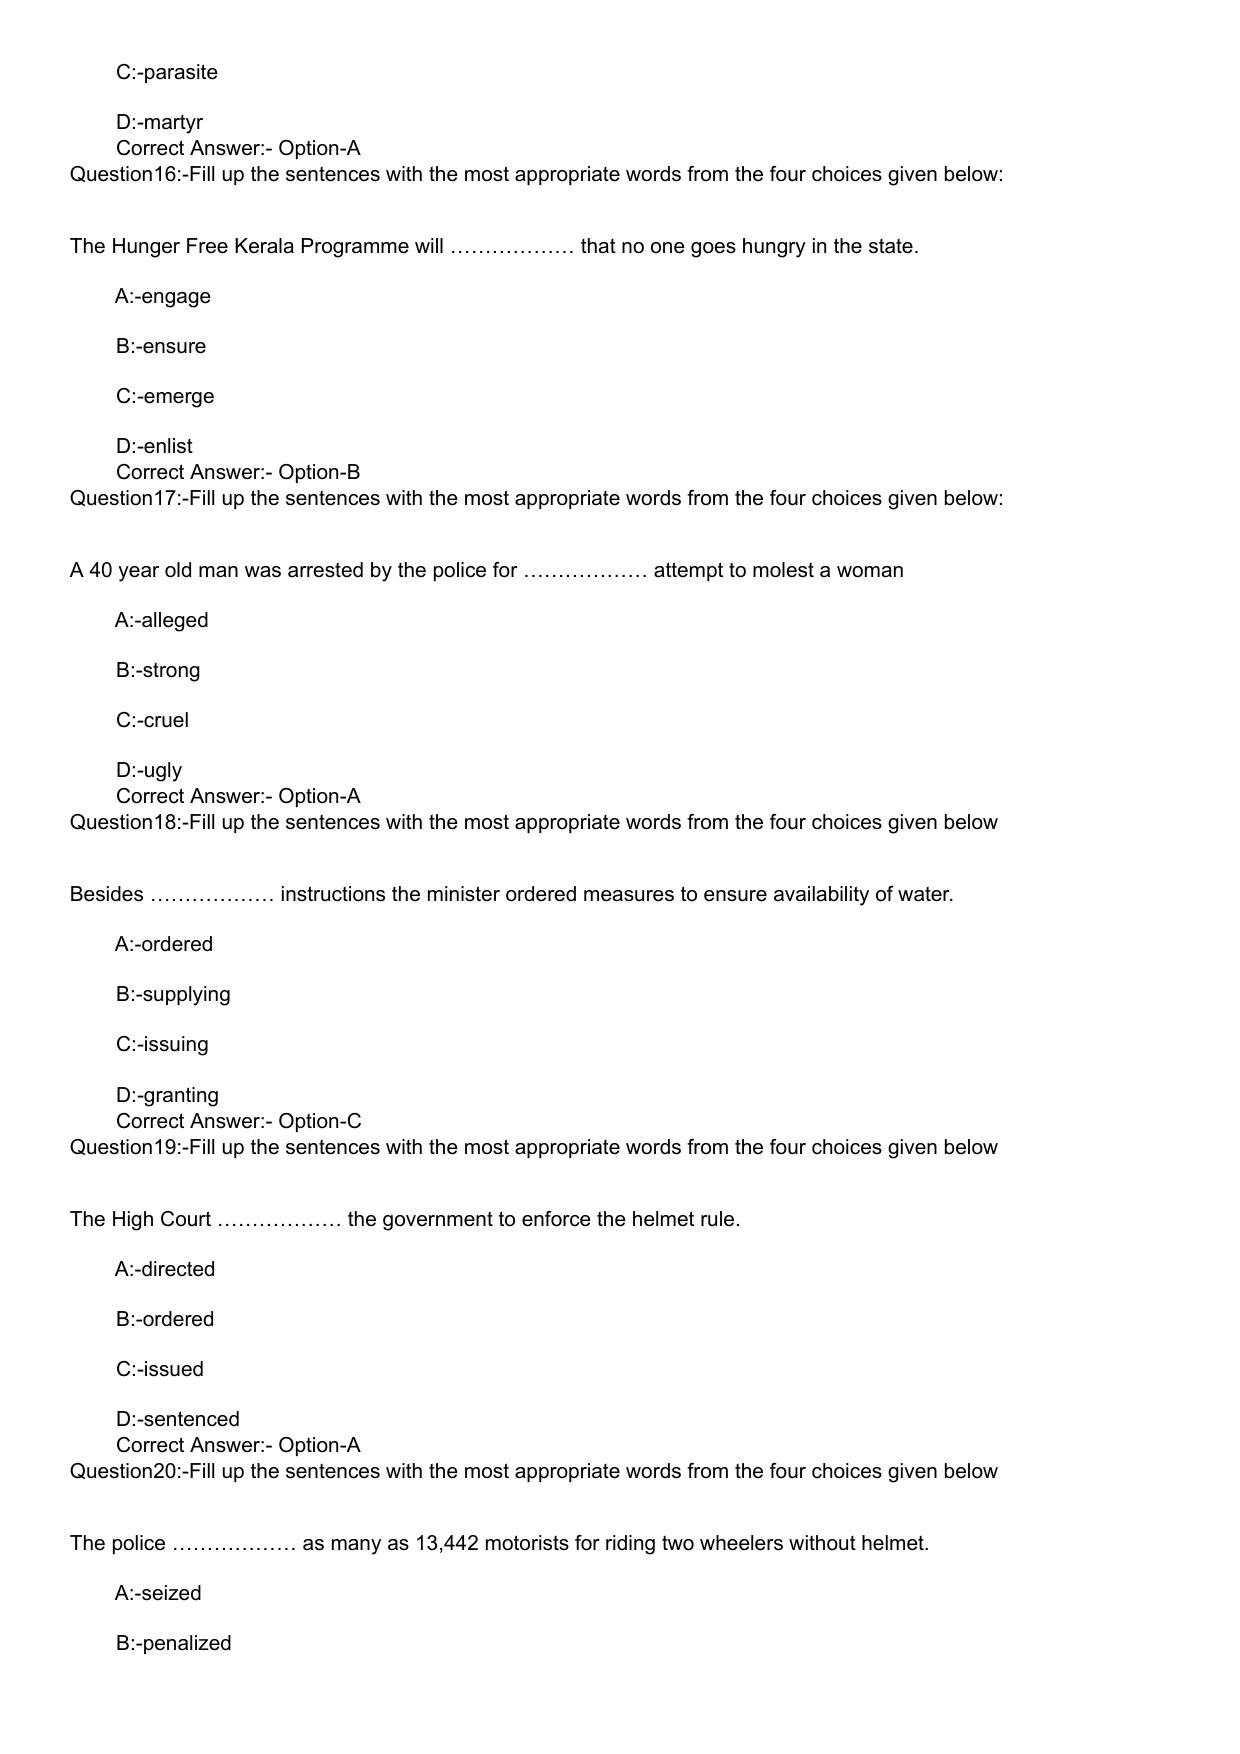 KLEE 5 Year LLB Exam 2020 Question Paper - Page 4